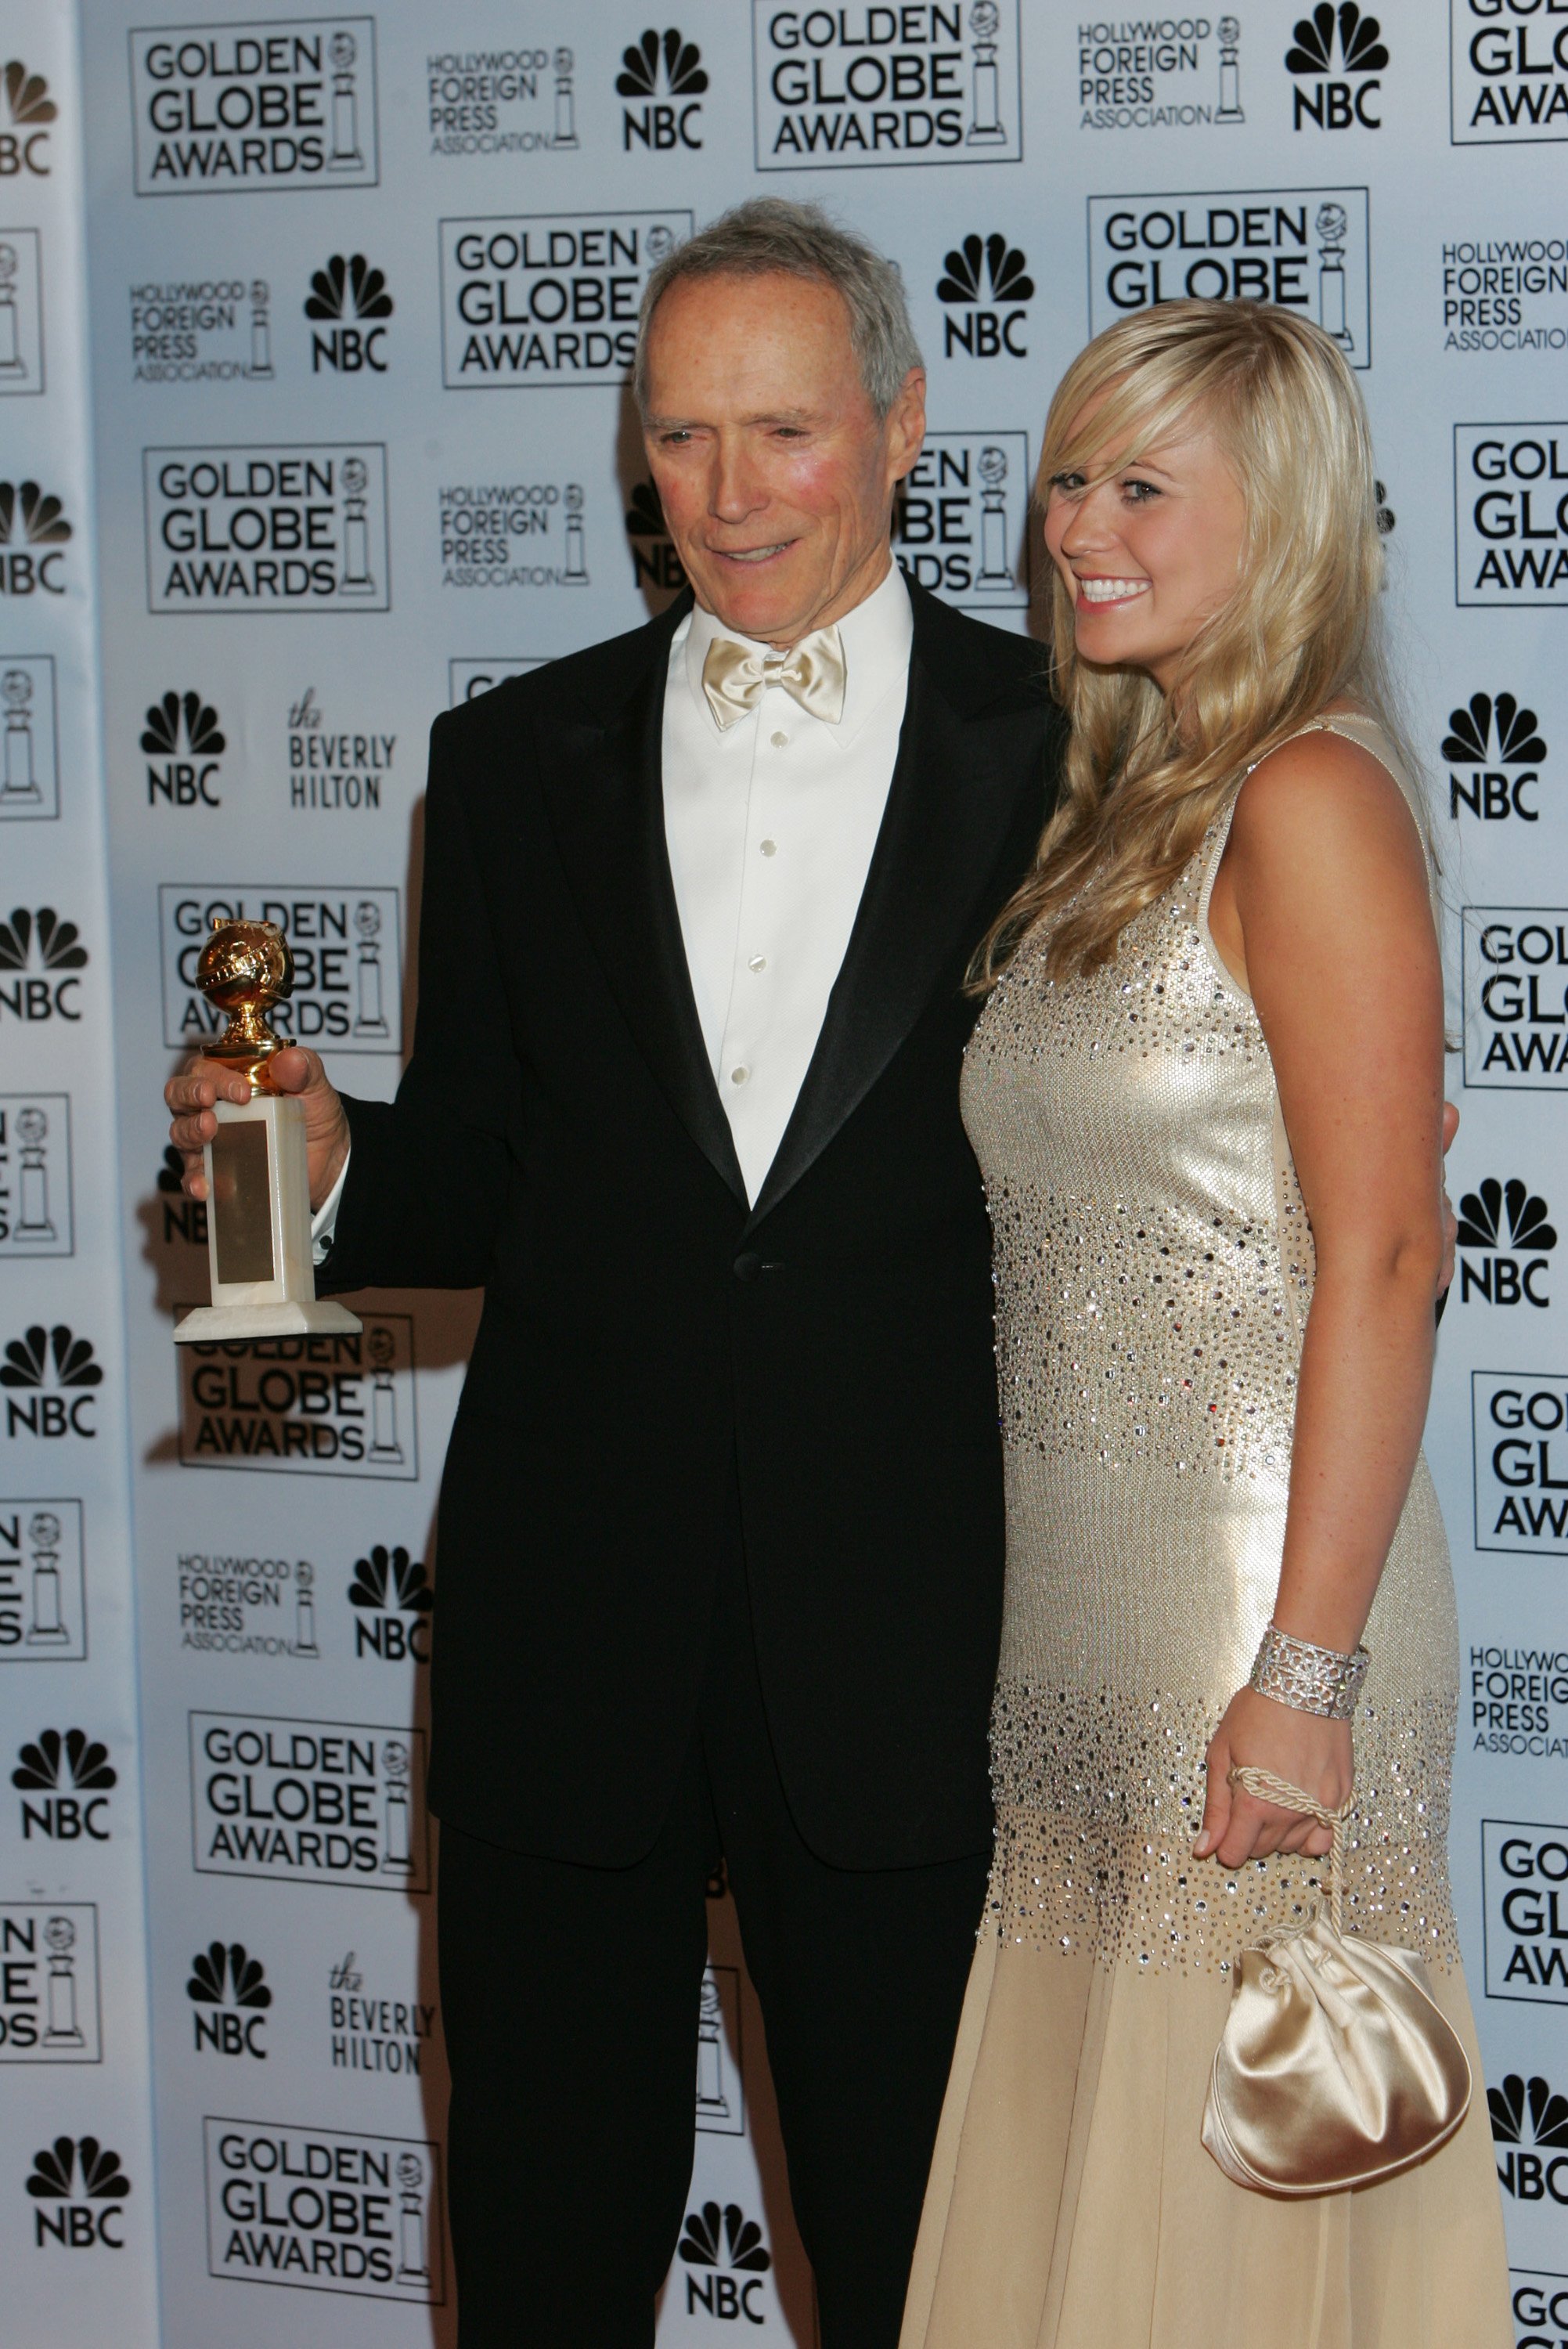 Clint and Kathryn Eastwood at the at the 62nd Annual Golden Globe Awards on January 16, 2005 | Source: Getty Images 